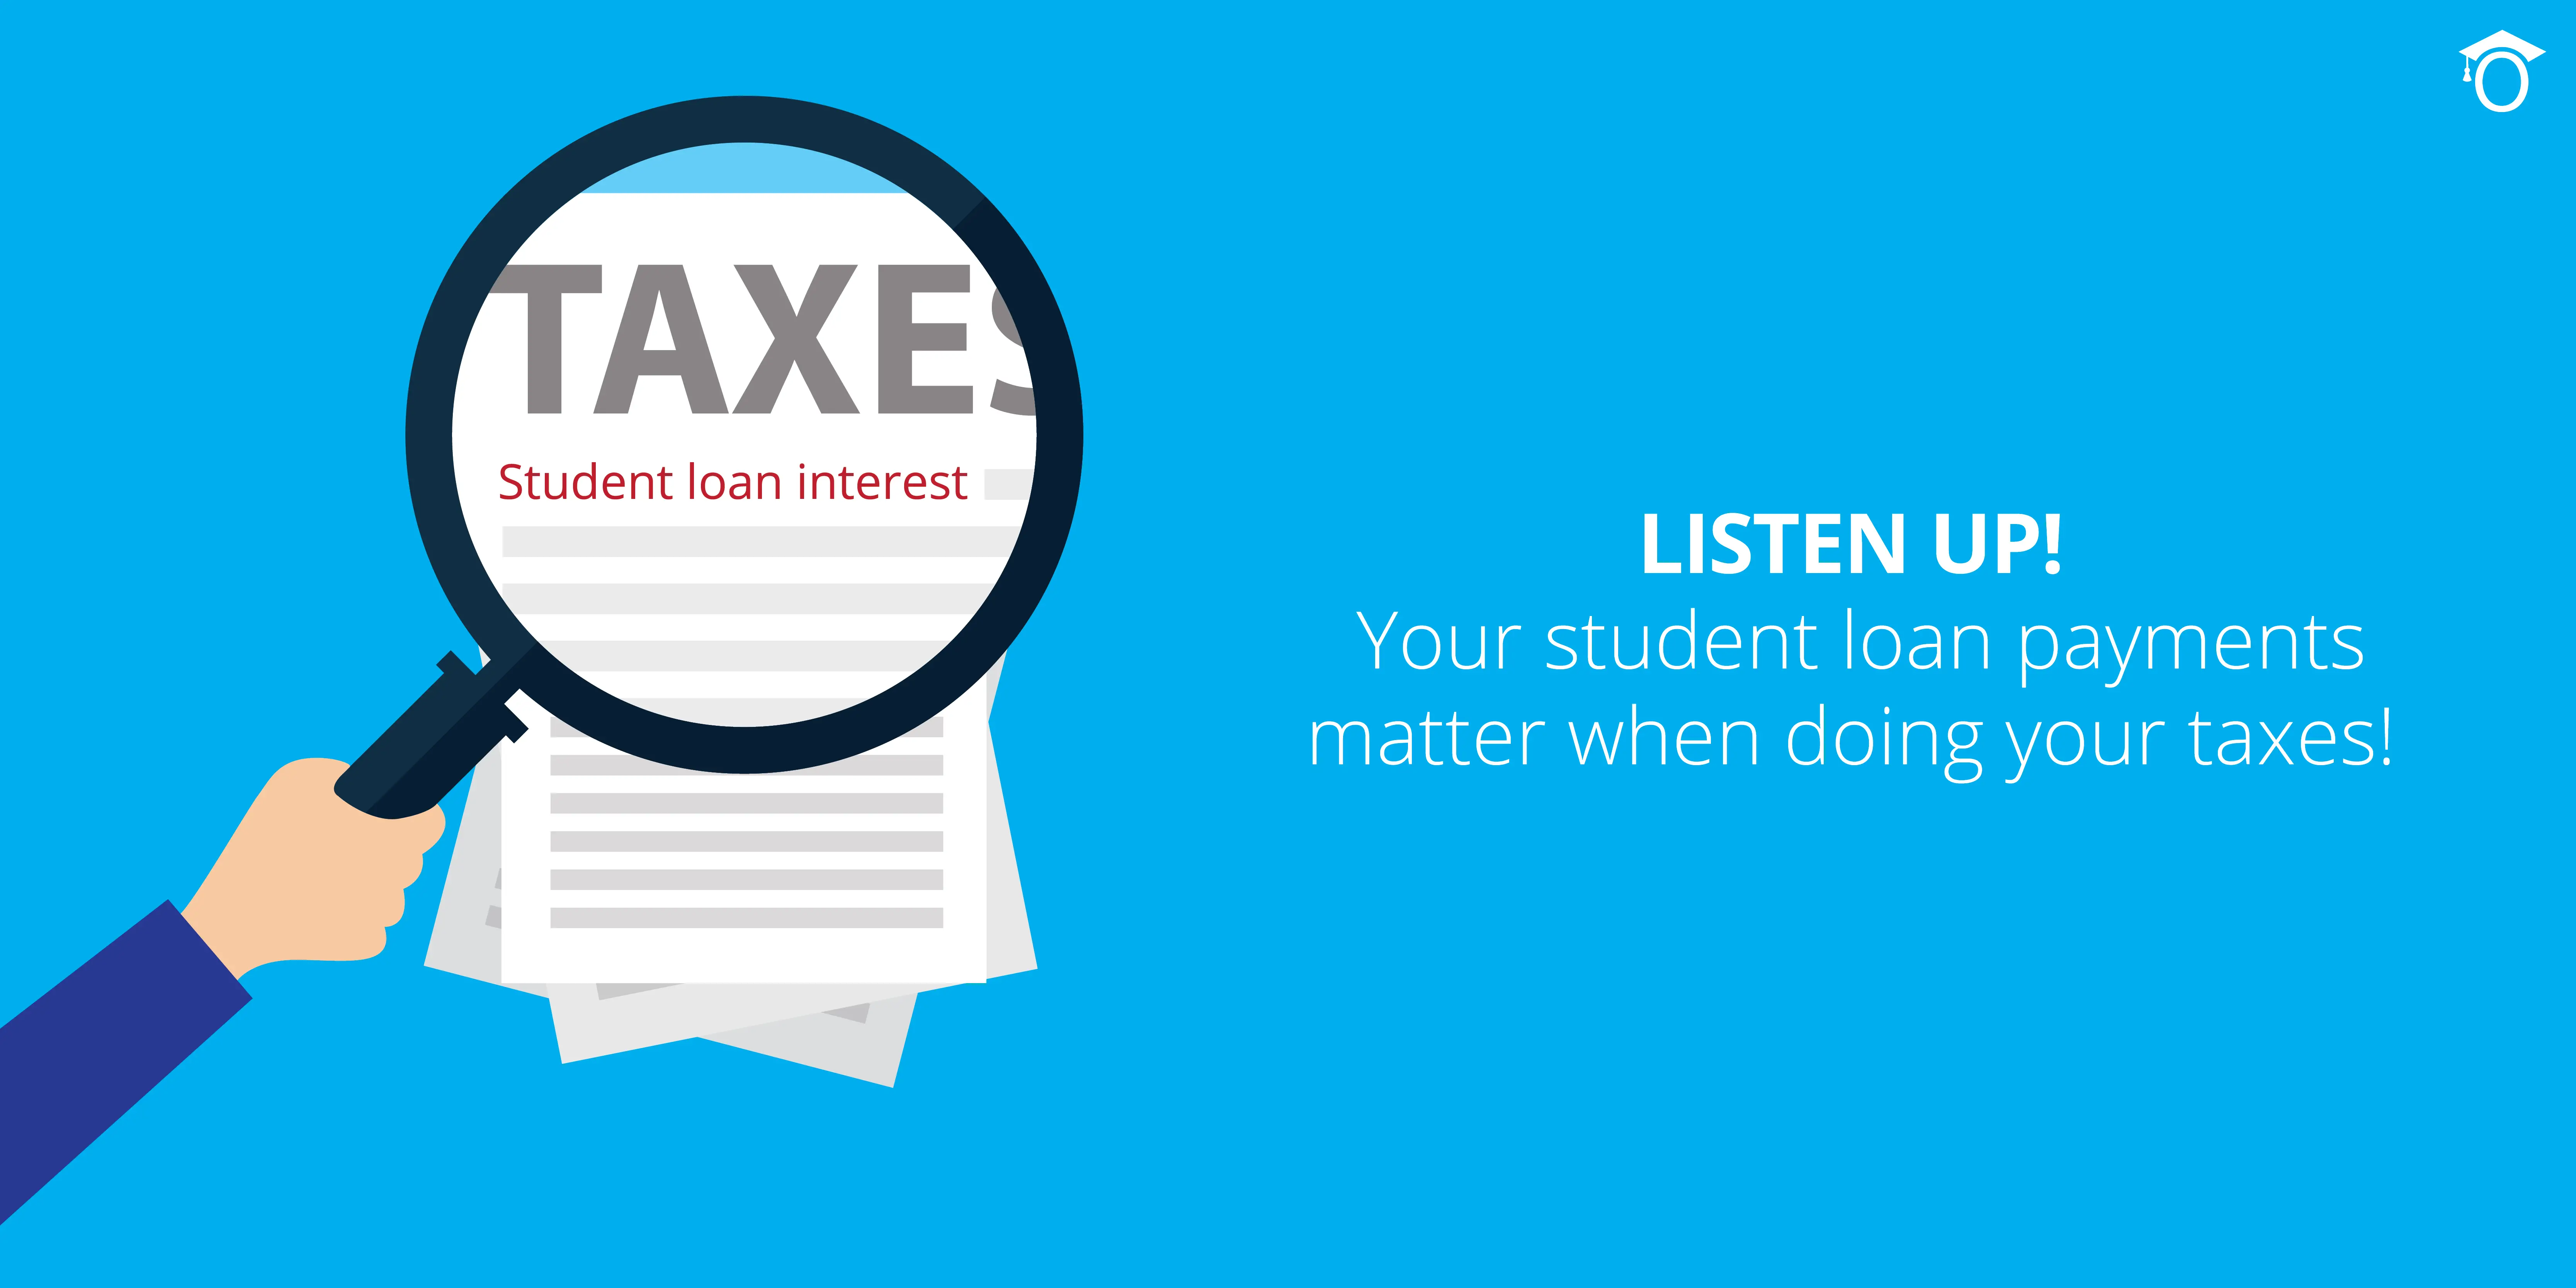 Remember your student loan interest on your taxes